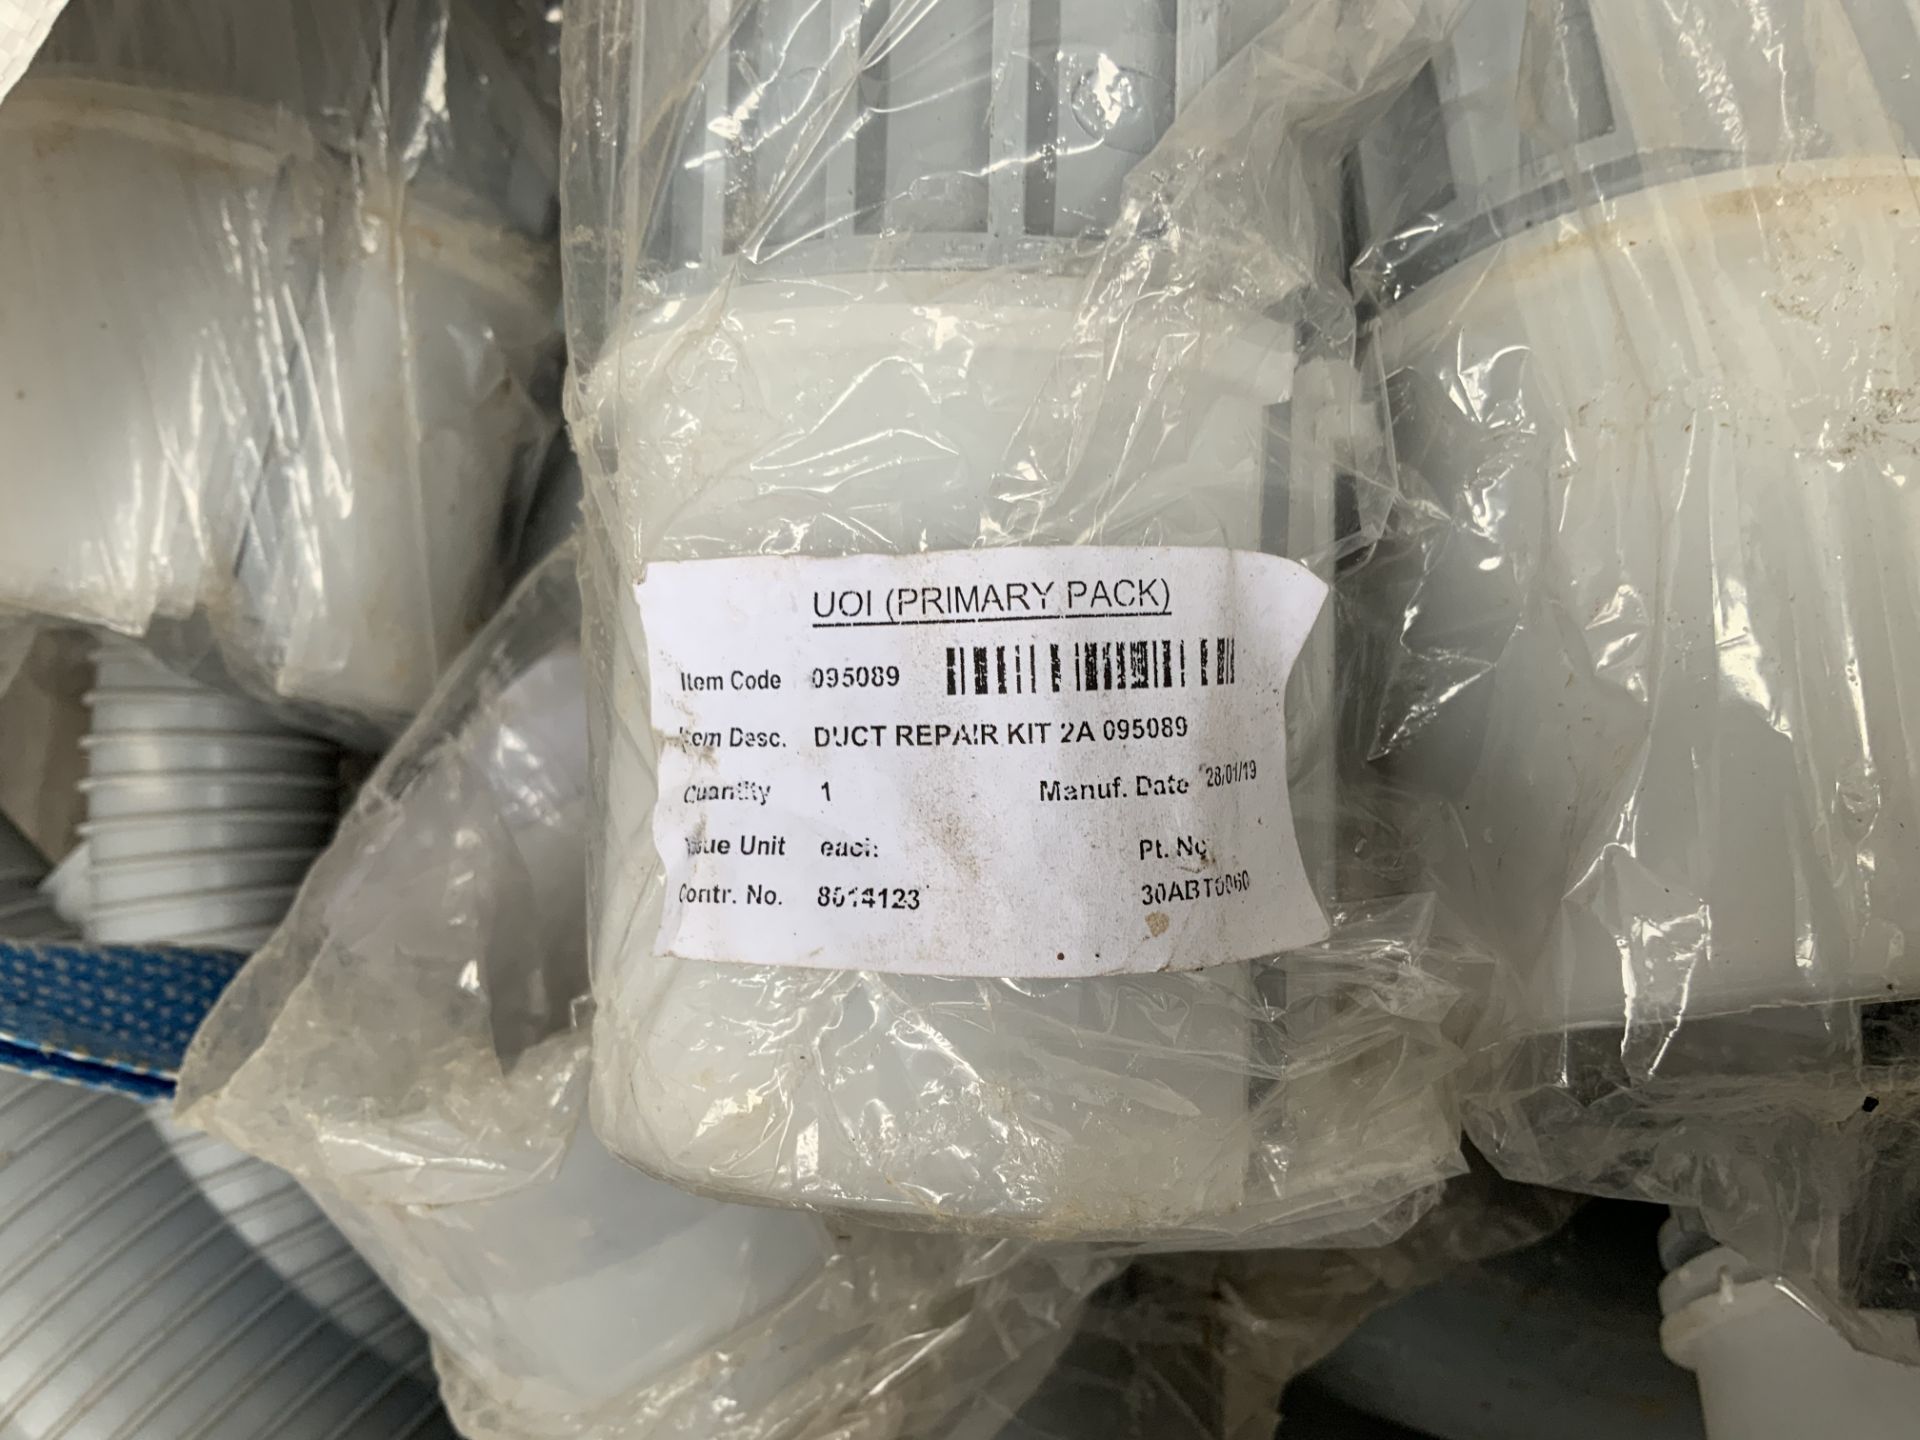 Quantity of UOI Item Code 095089 Duct Repair Kits 2A, Manufacture Date 01.2019 - (Located in Telford - Image 4 of 4